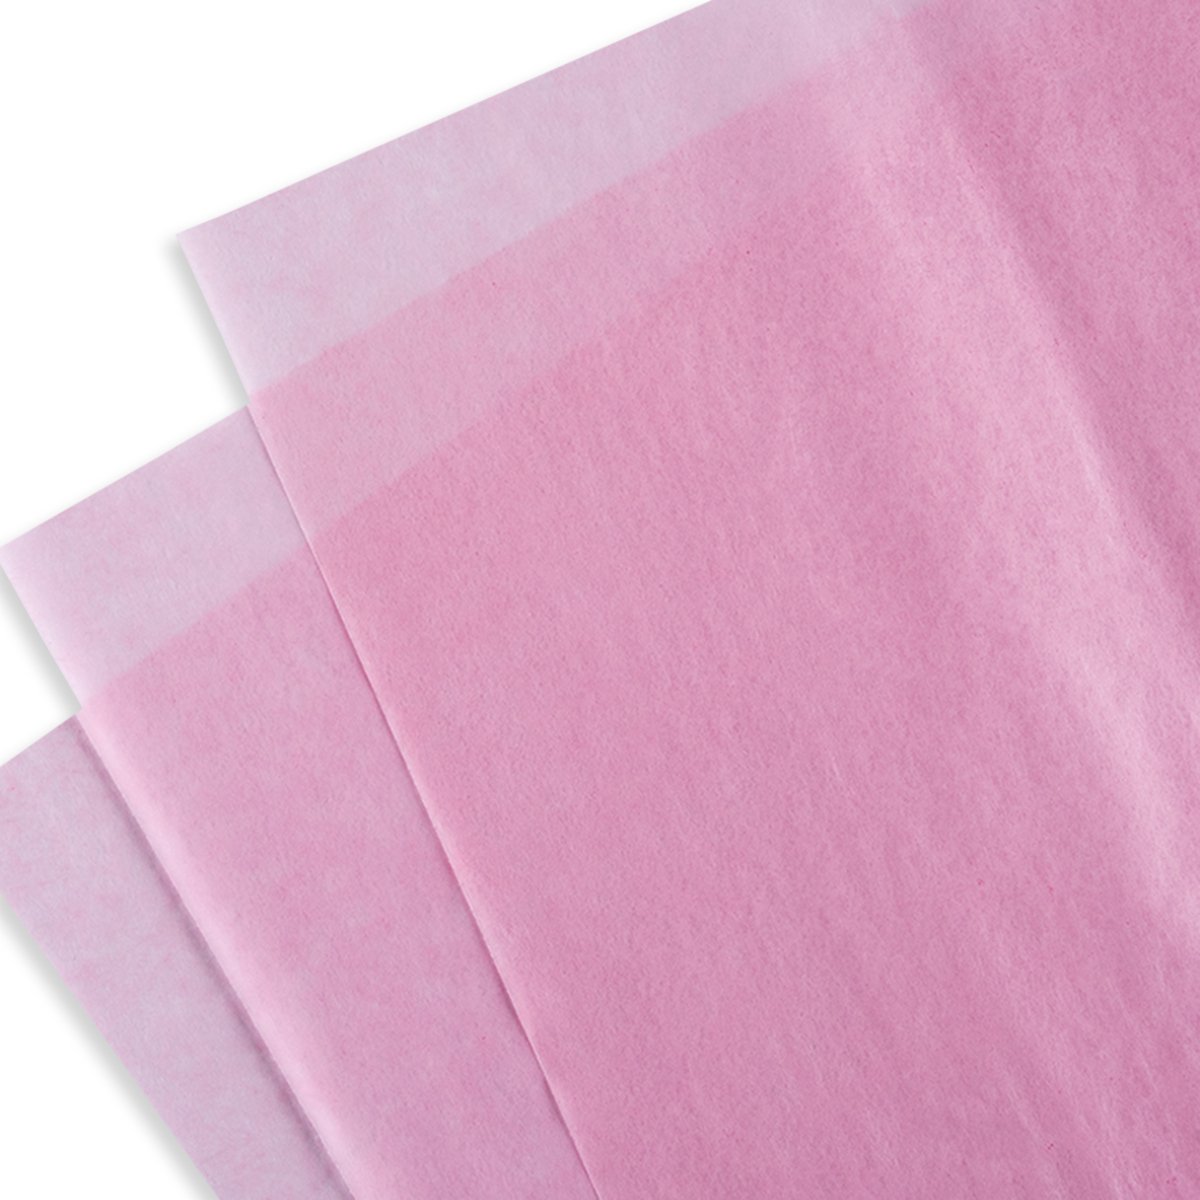 Premium Grade Tissue Paper - 8-10 reams (3,840-4,800 sheets) - Cleaner's  Supply